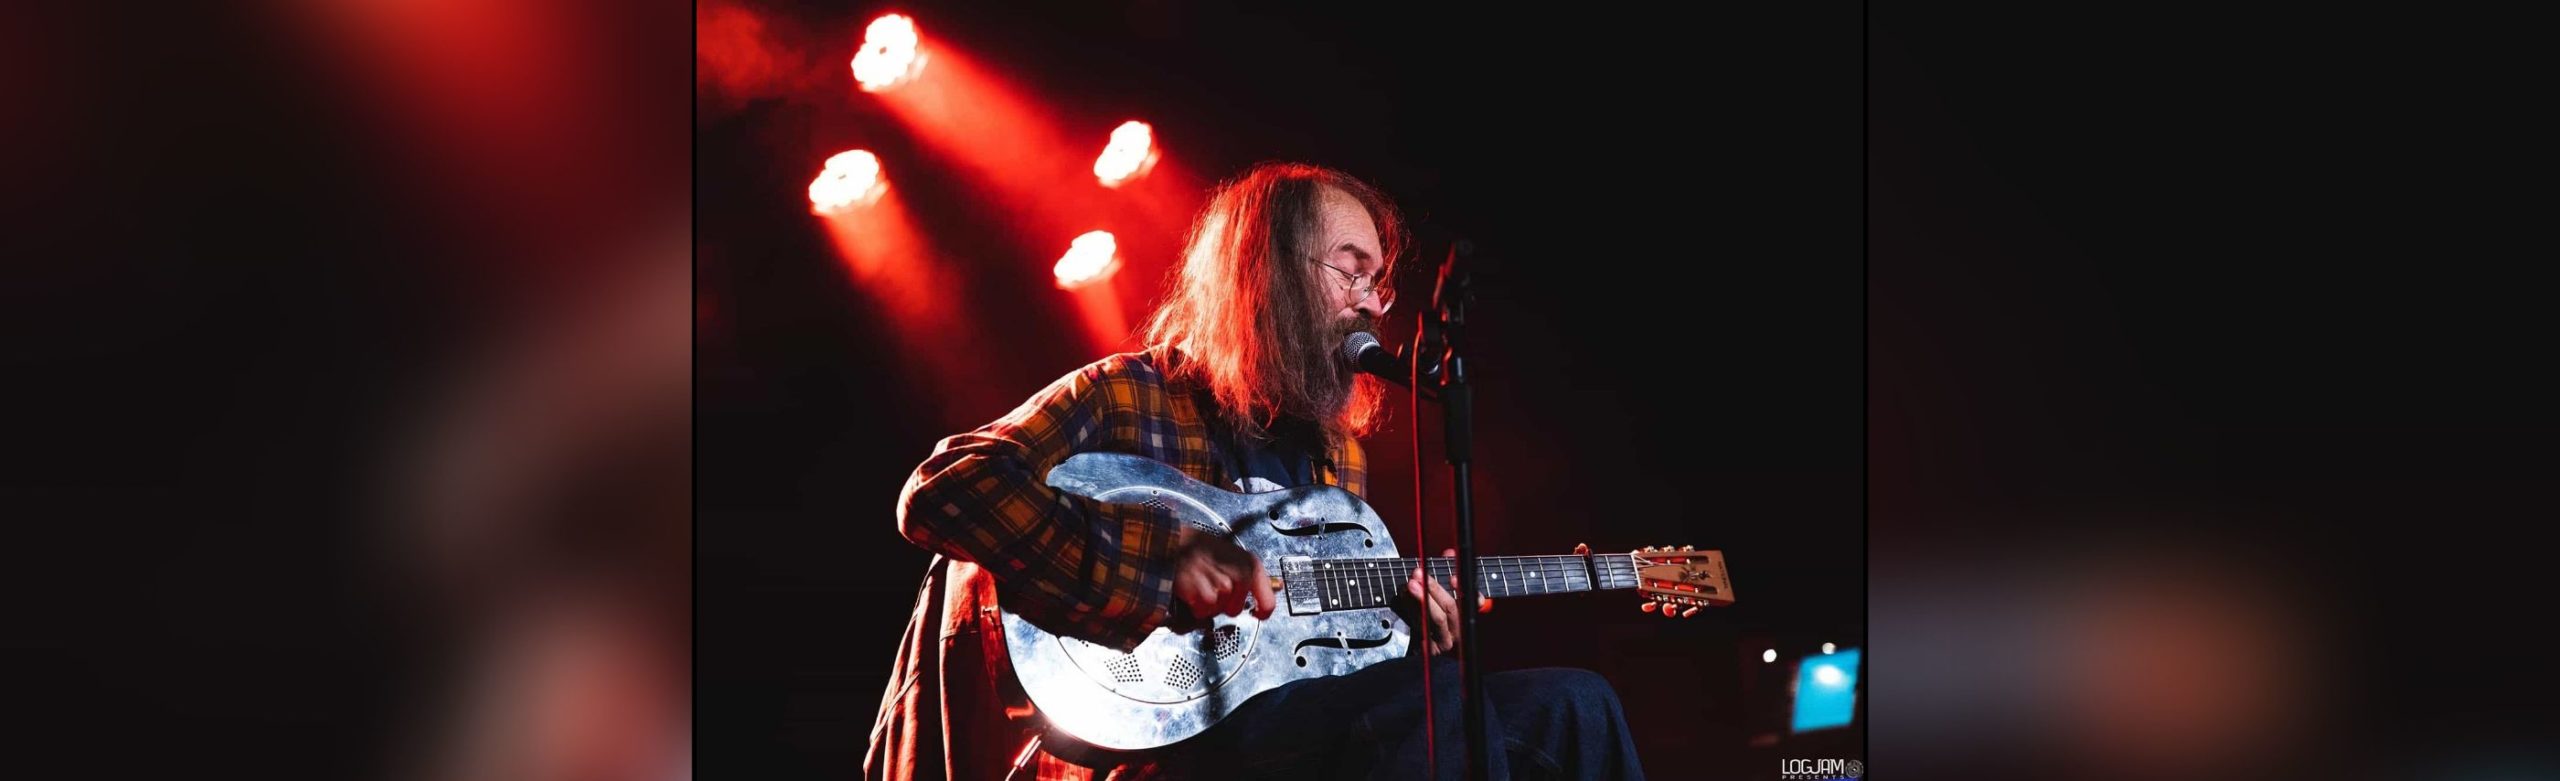 Charlie Parr Announces Return to Montana for Two Concerts Image